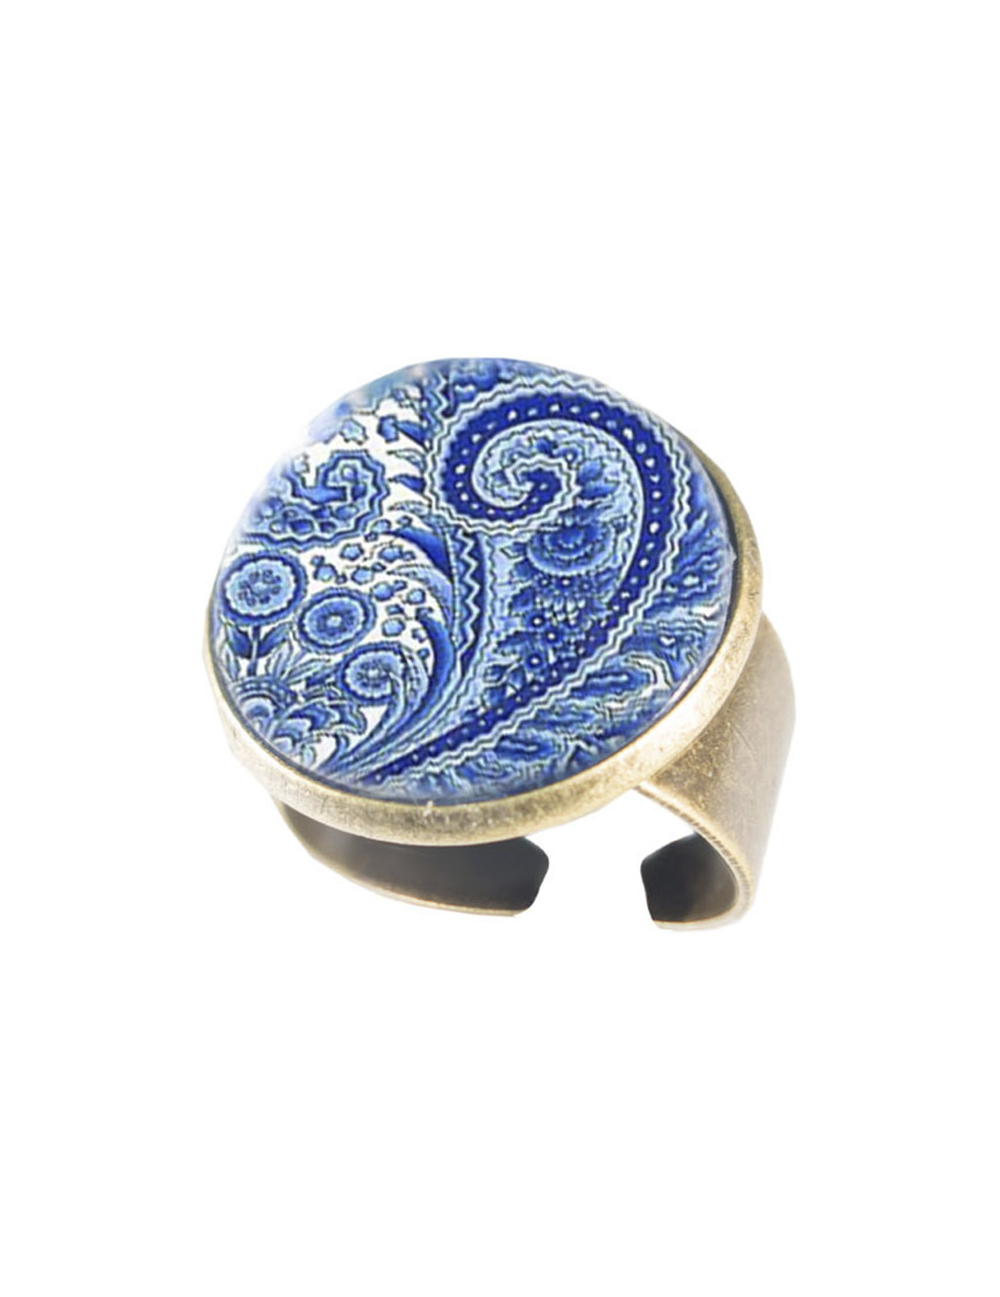 Ring, $40, by Fabuleux Vous.